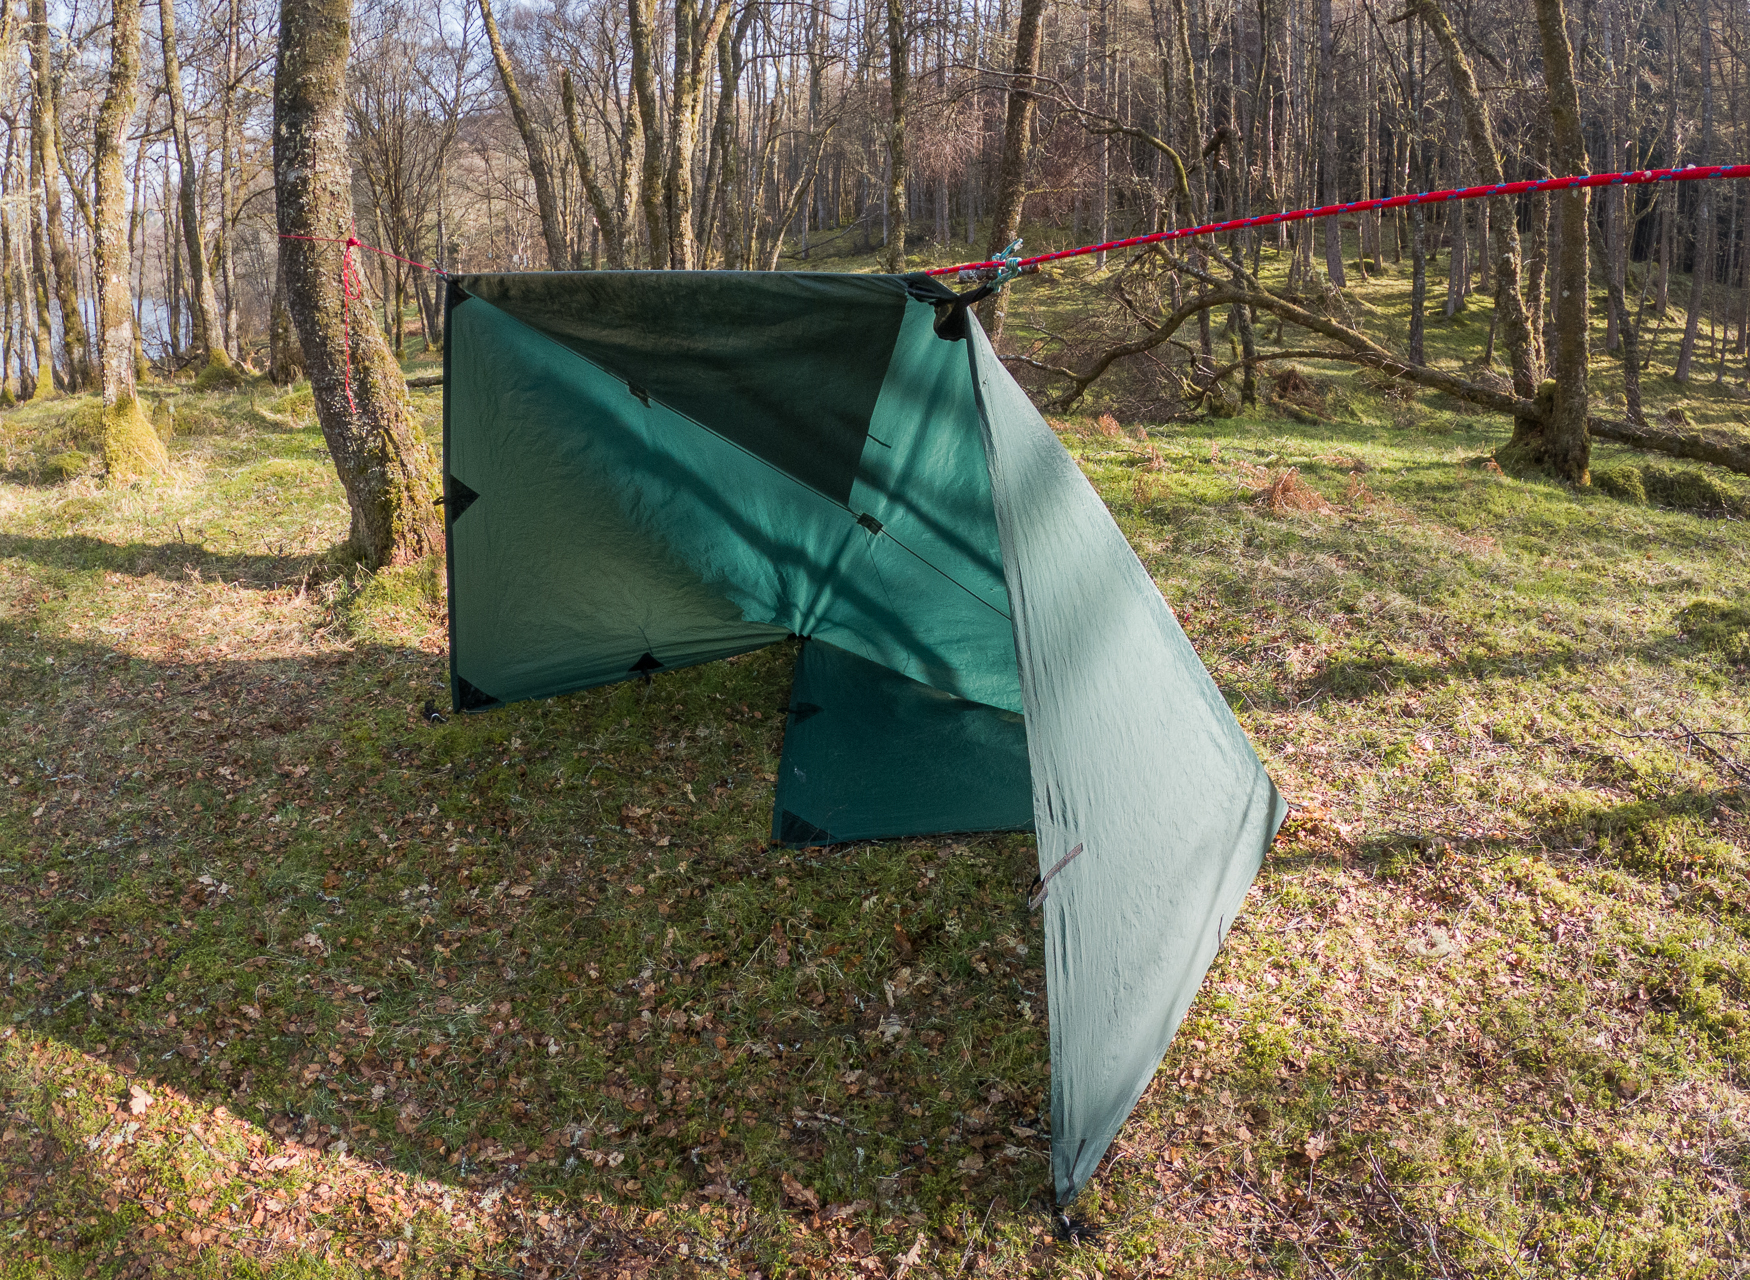 How to build a shelter with a tarp